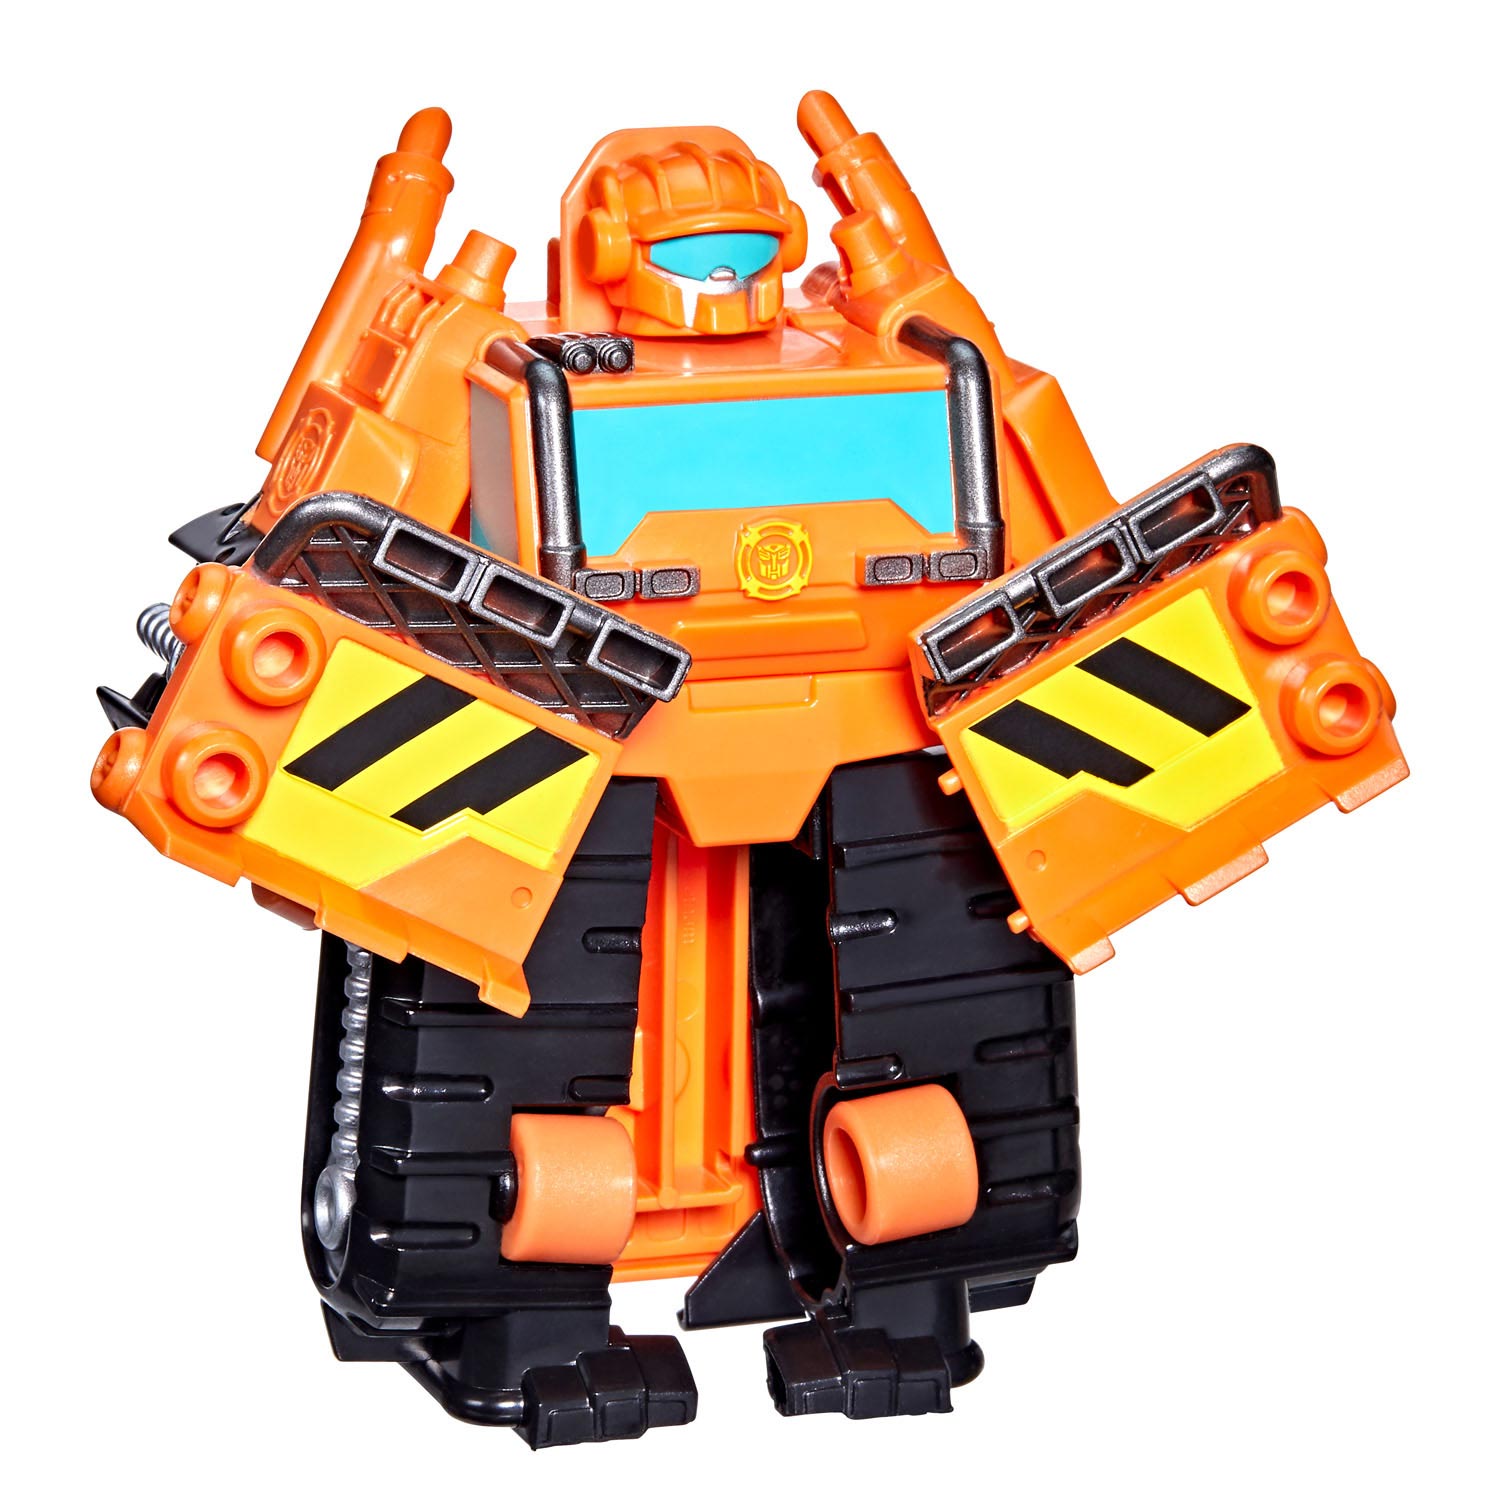 Transformers Rescue Bots Academy - Wedge the Construction